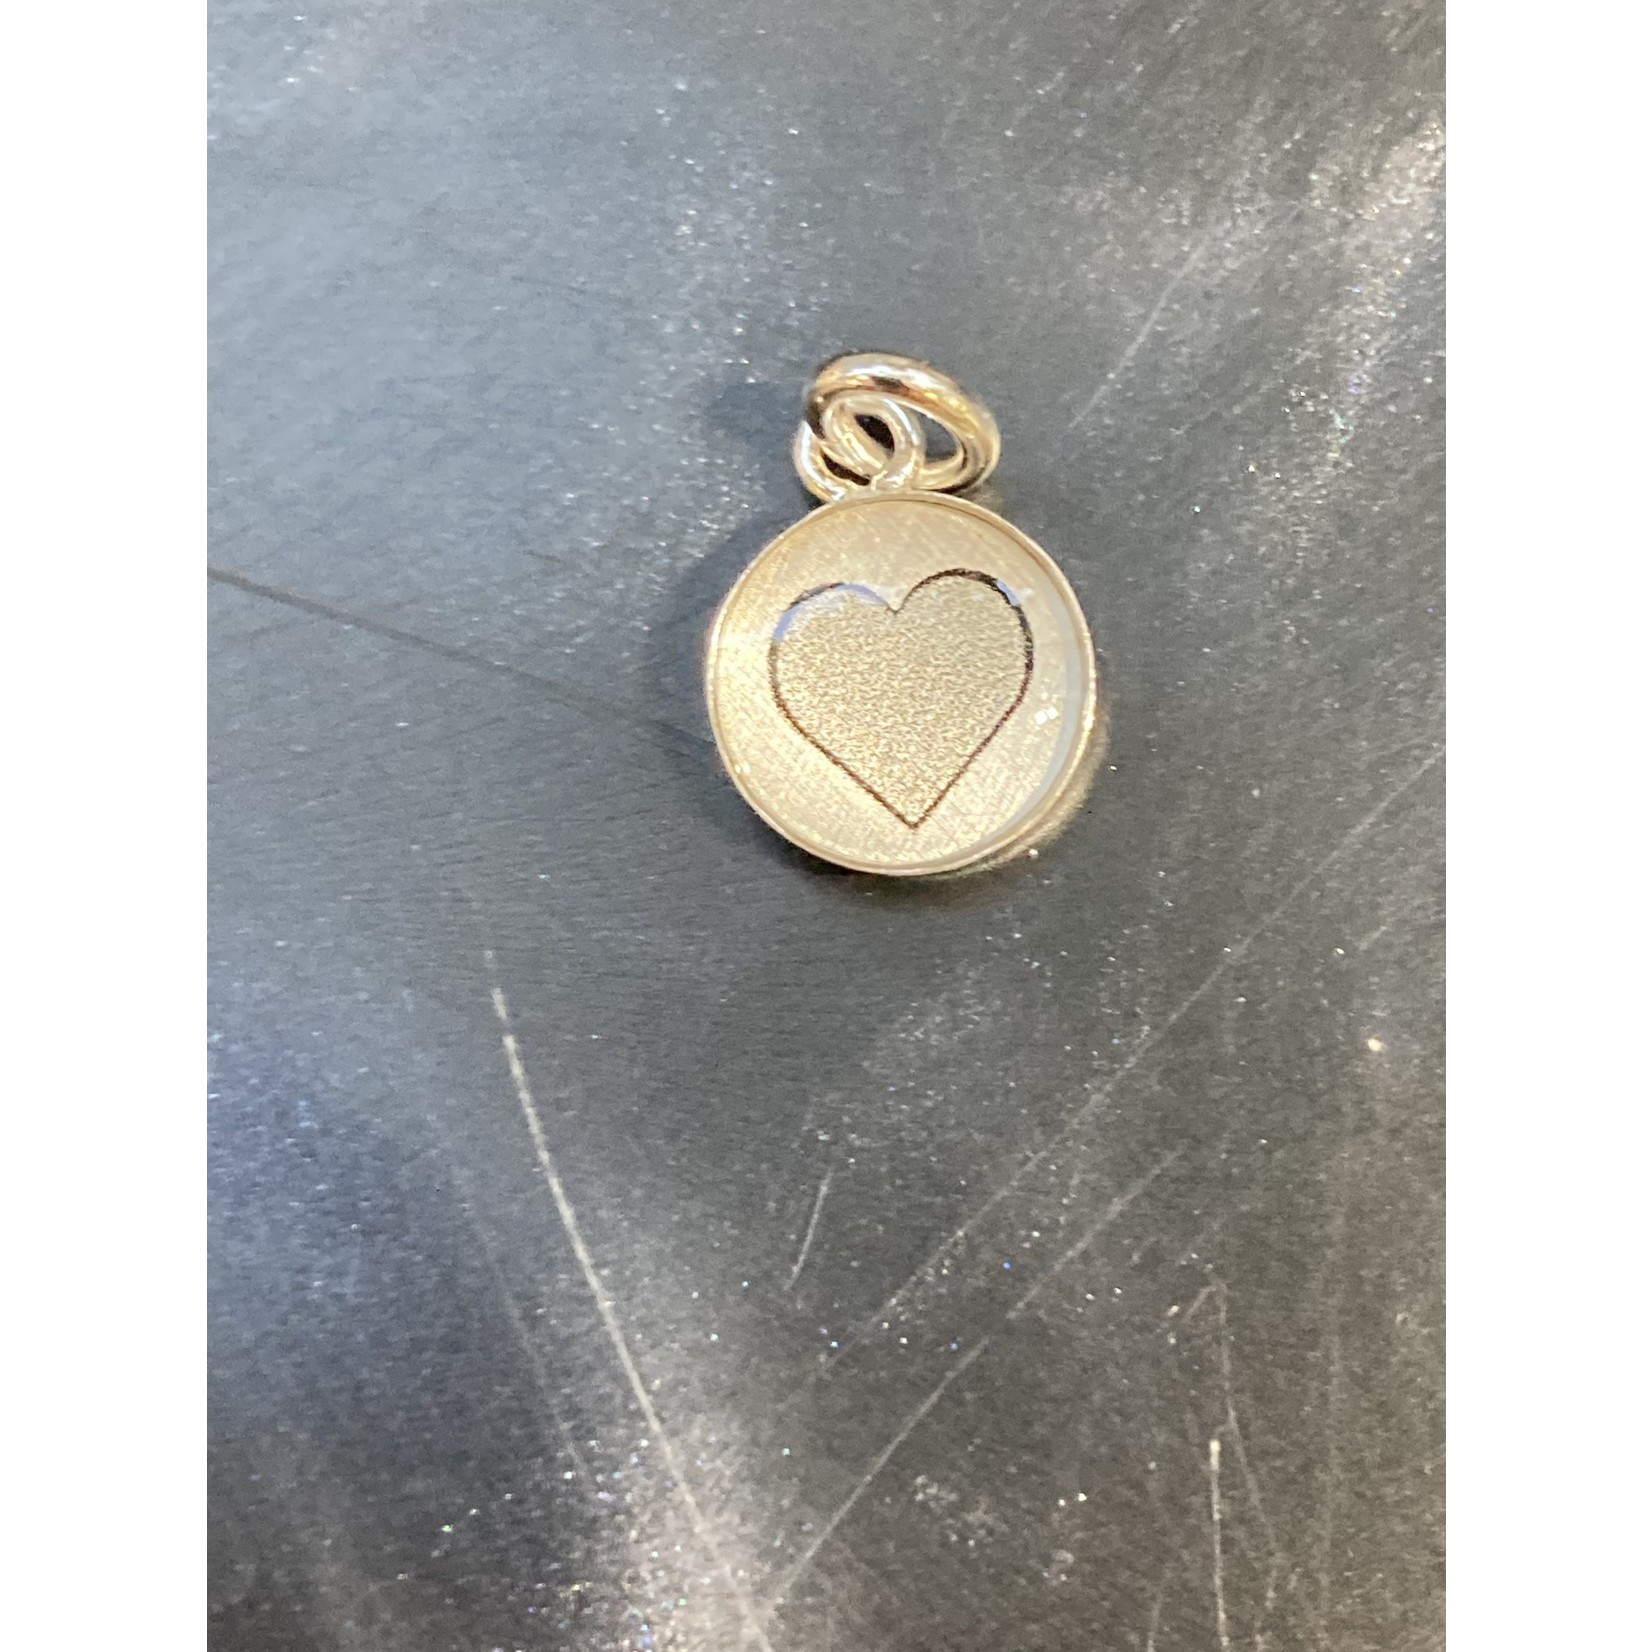 Everyday Artifacts Everyday Artifacts | graphic heart symbol 8mm SS Bezel Pendant